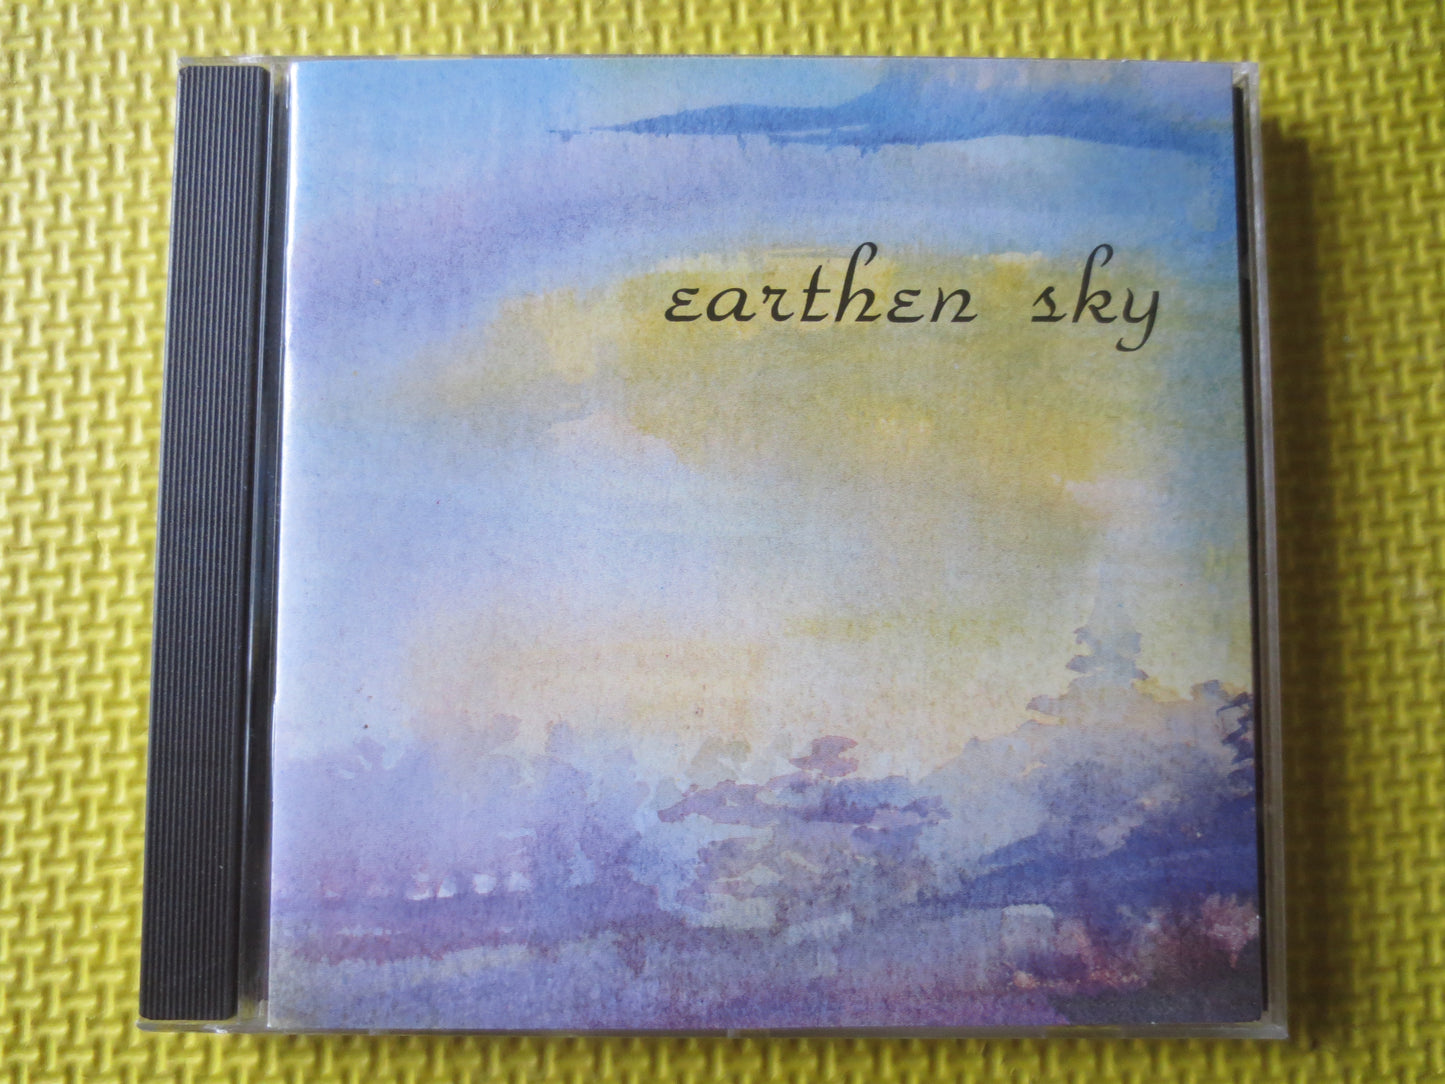 EARTHEN SKY,  Electronic Music Cd, Ambient Music Cd, Earthen Sky Lp, Earthen Sky Cd, Vintage Compact Disc, 1992 Compact Disc